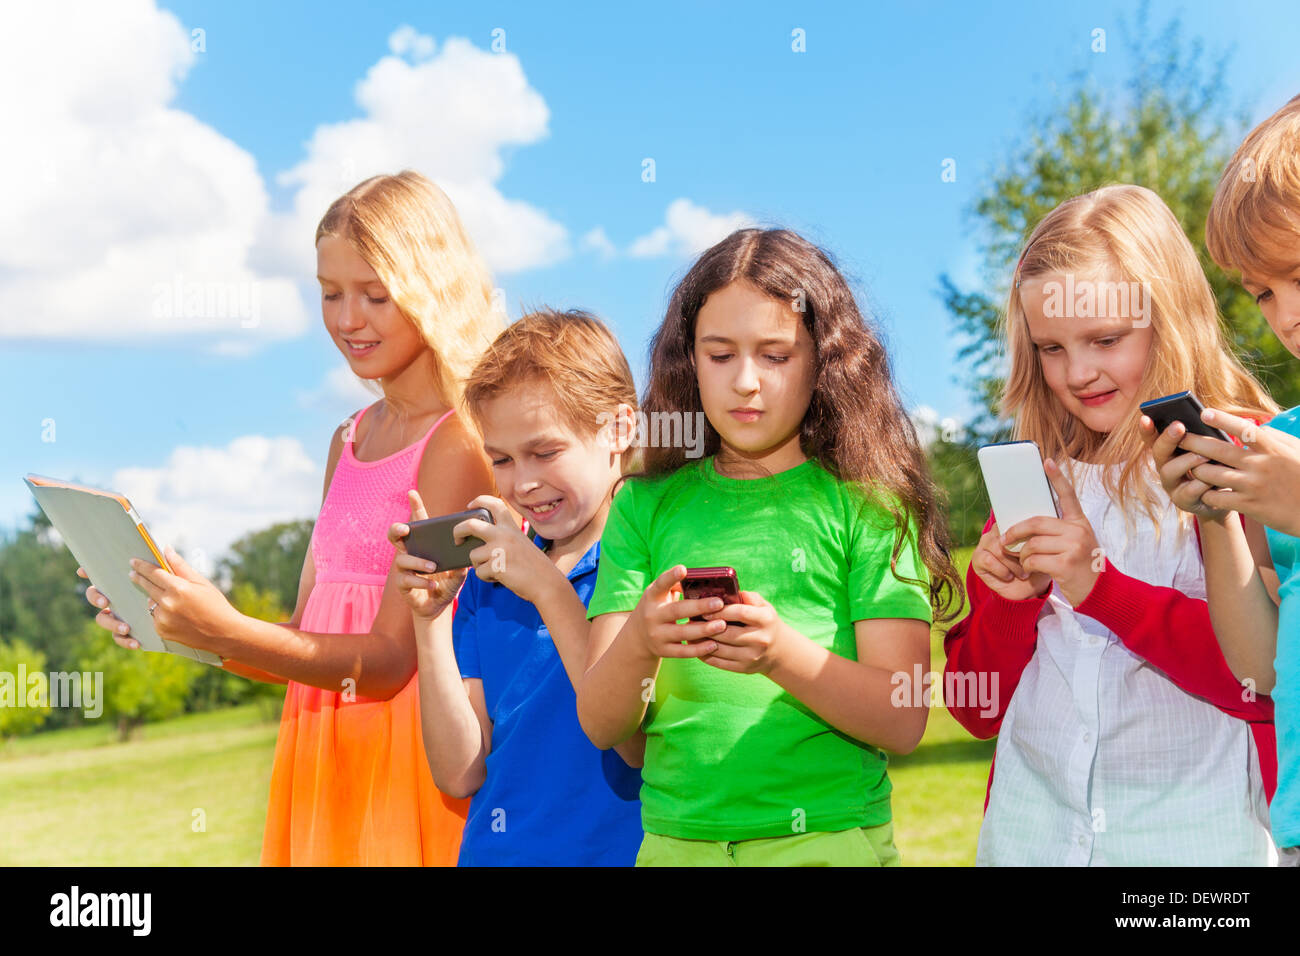 Five happy kids stnading with phones and digital devices Stock Photo